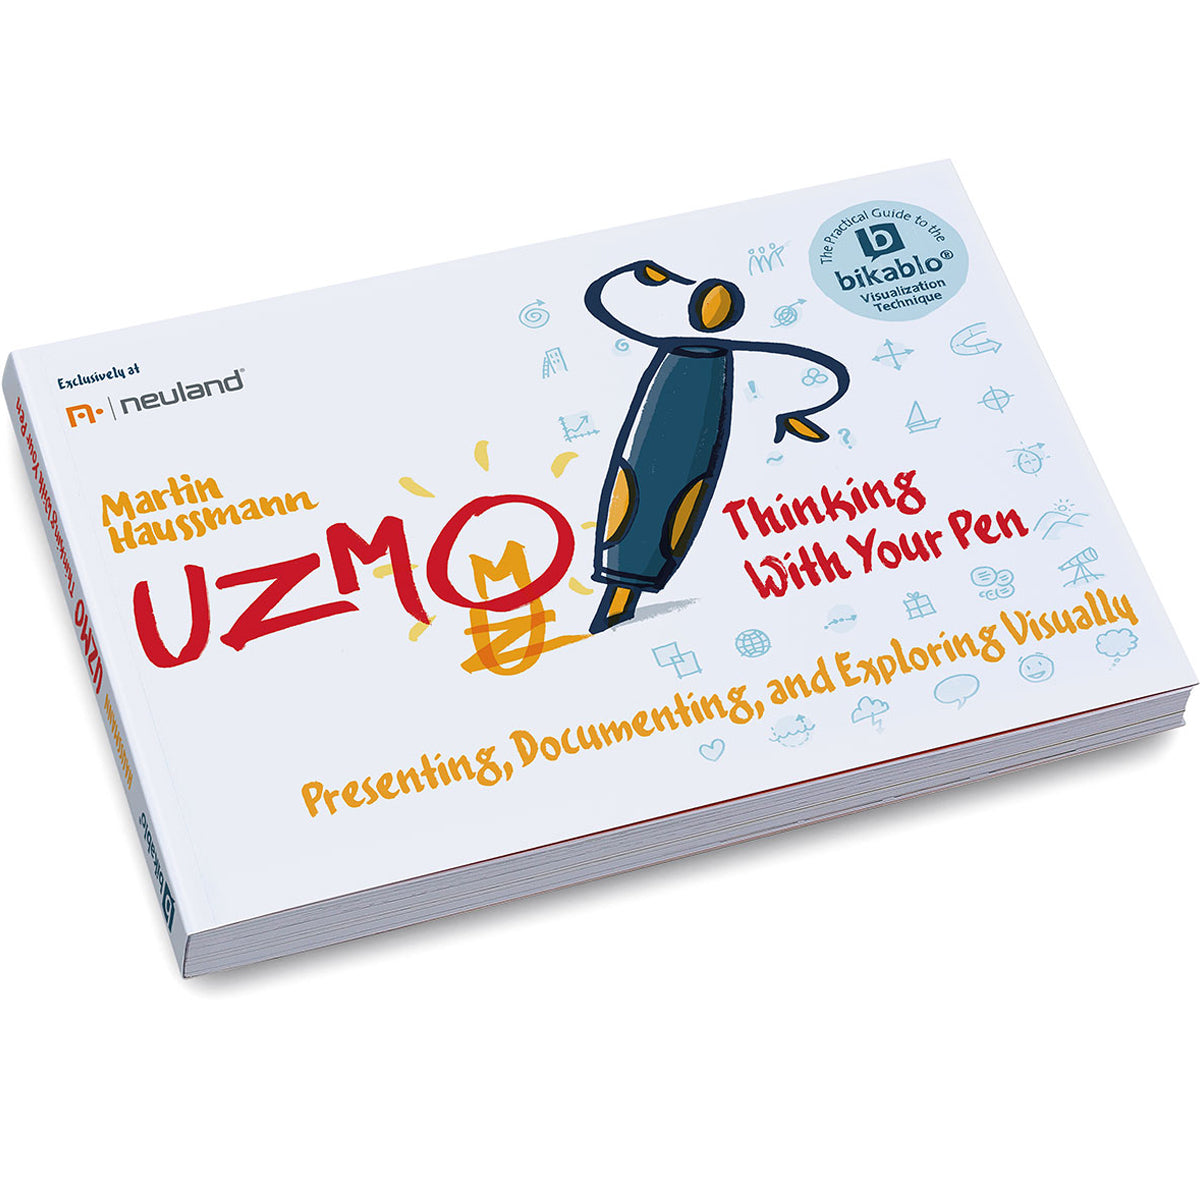 UZMO – Thinking With Your Pen (Engels)